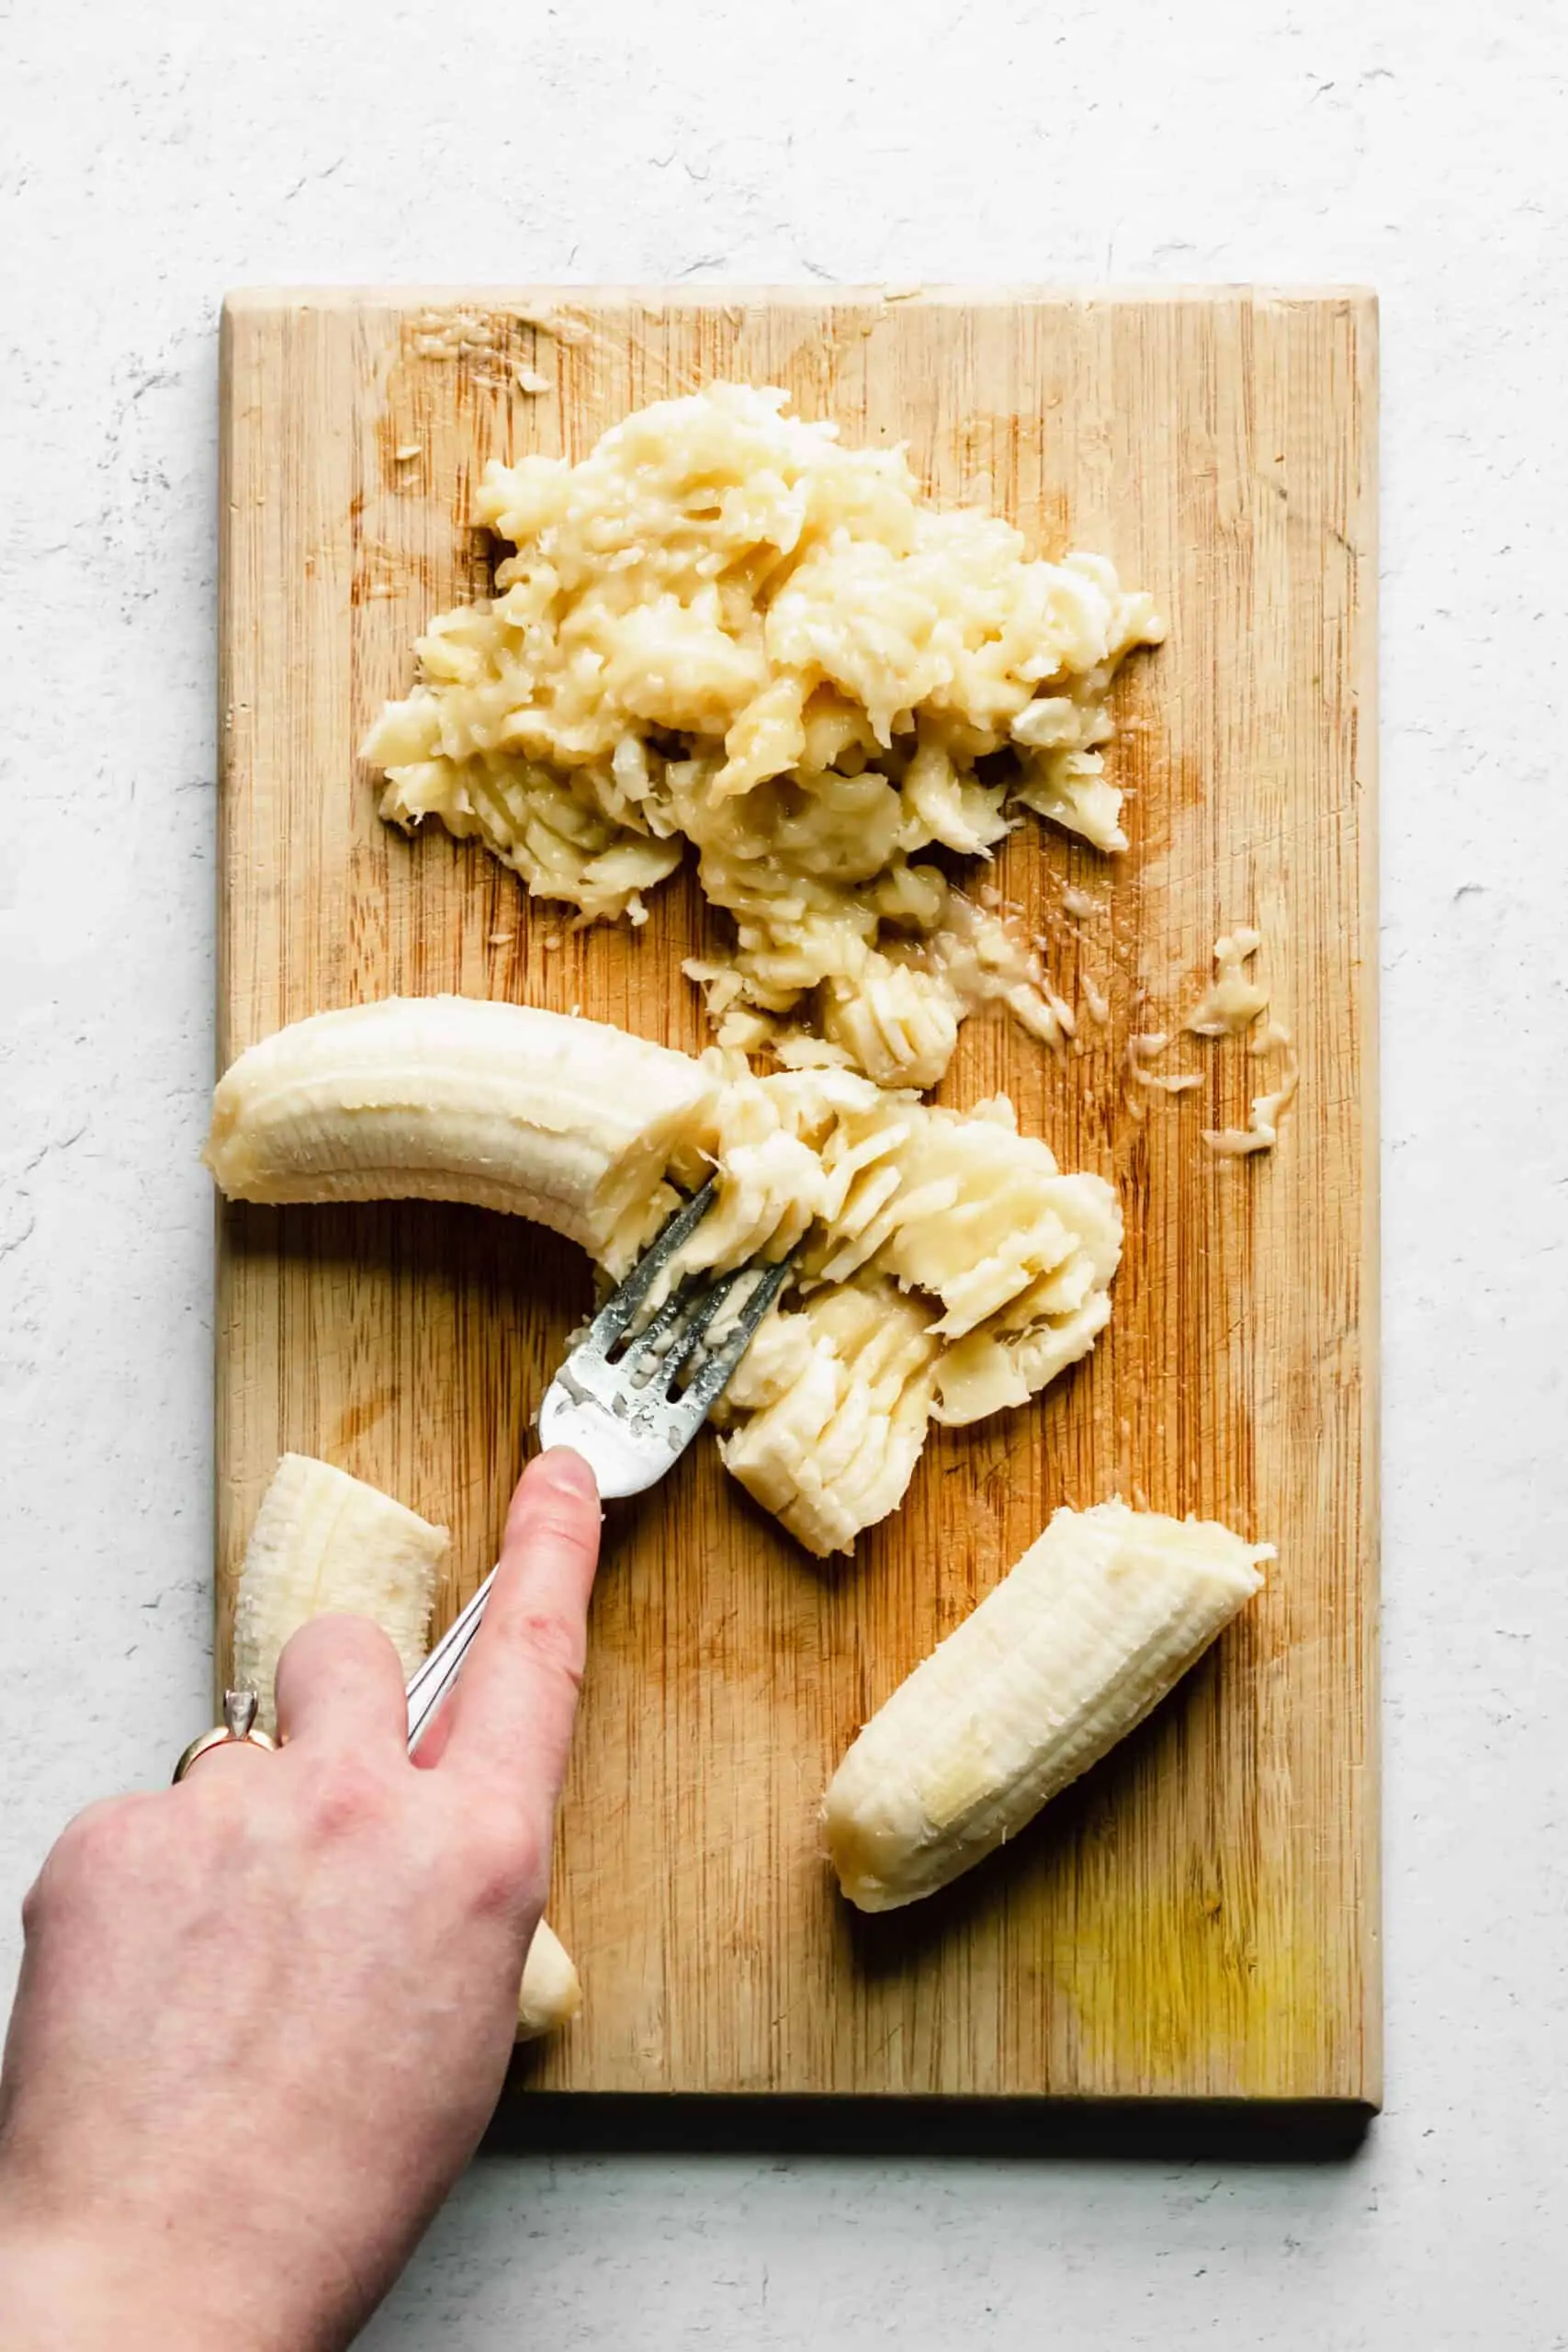 A hand mashed bananas on a cutting board with a fork.